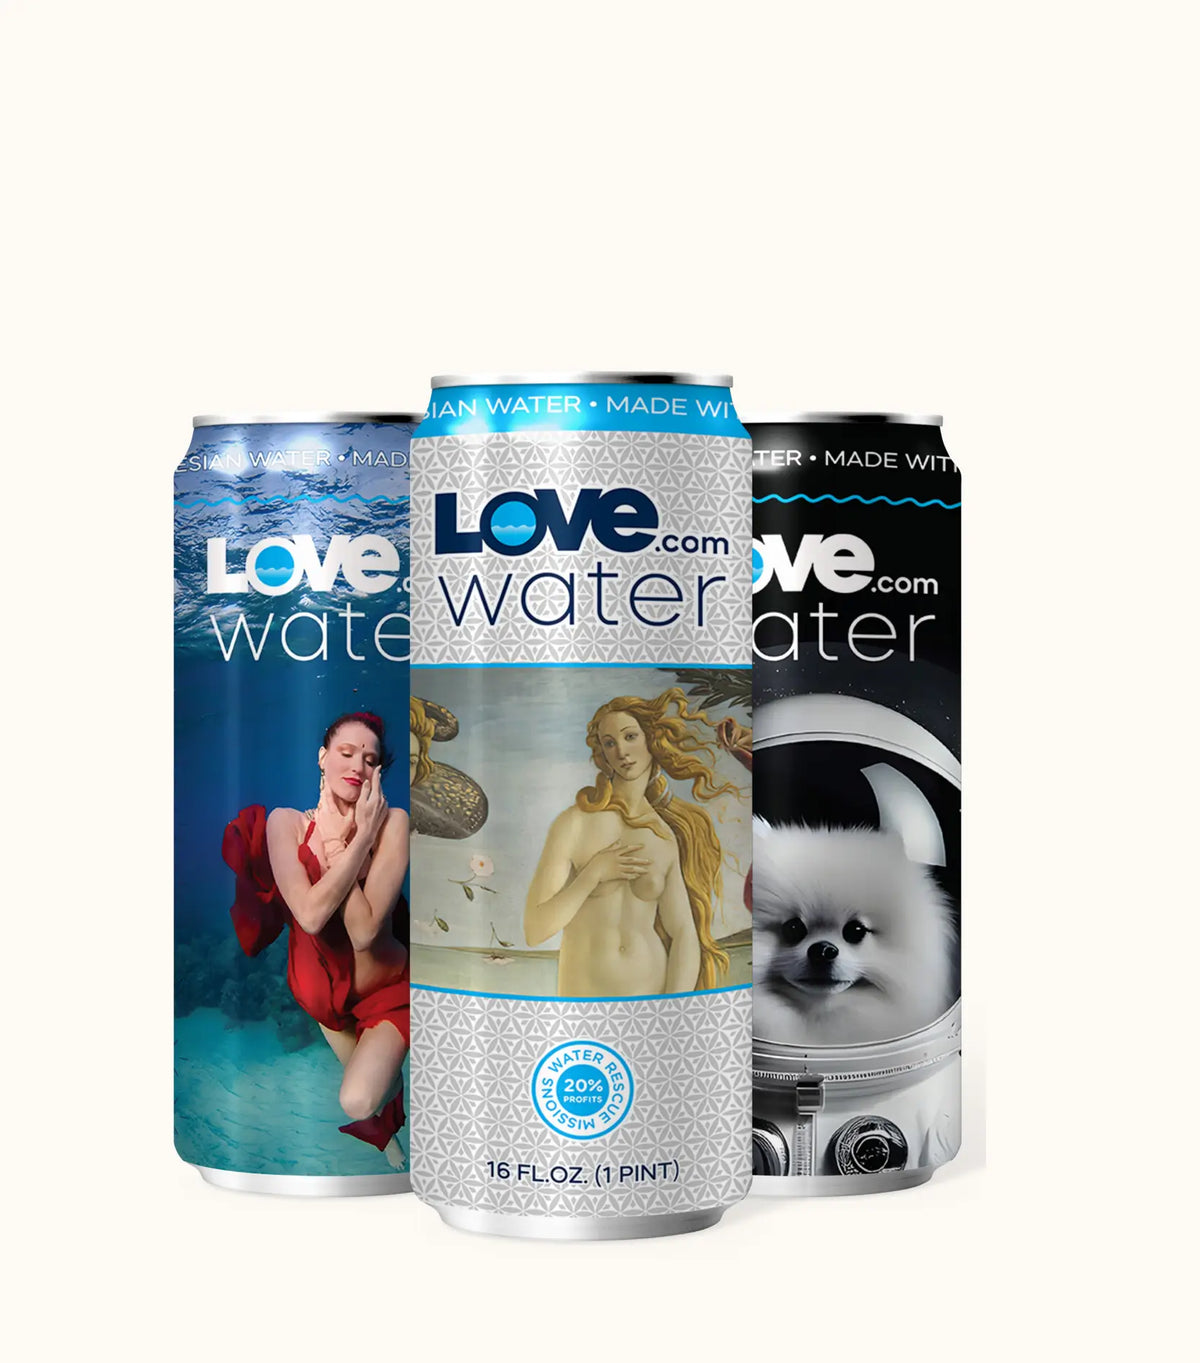 Love Water, 100% Naturally Alkaline, Artesian Water,  Recycled Aluminum 12 oz Cans, by Love.com, Case of 24